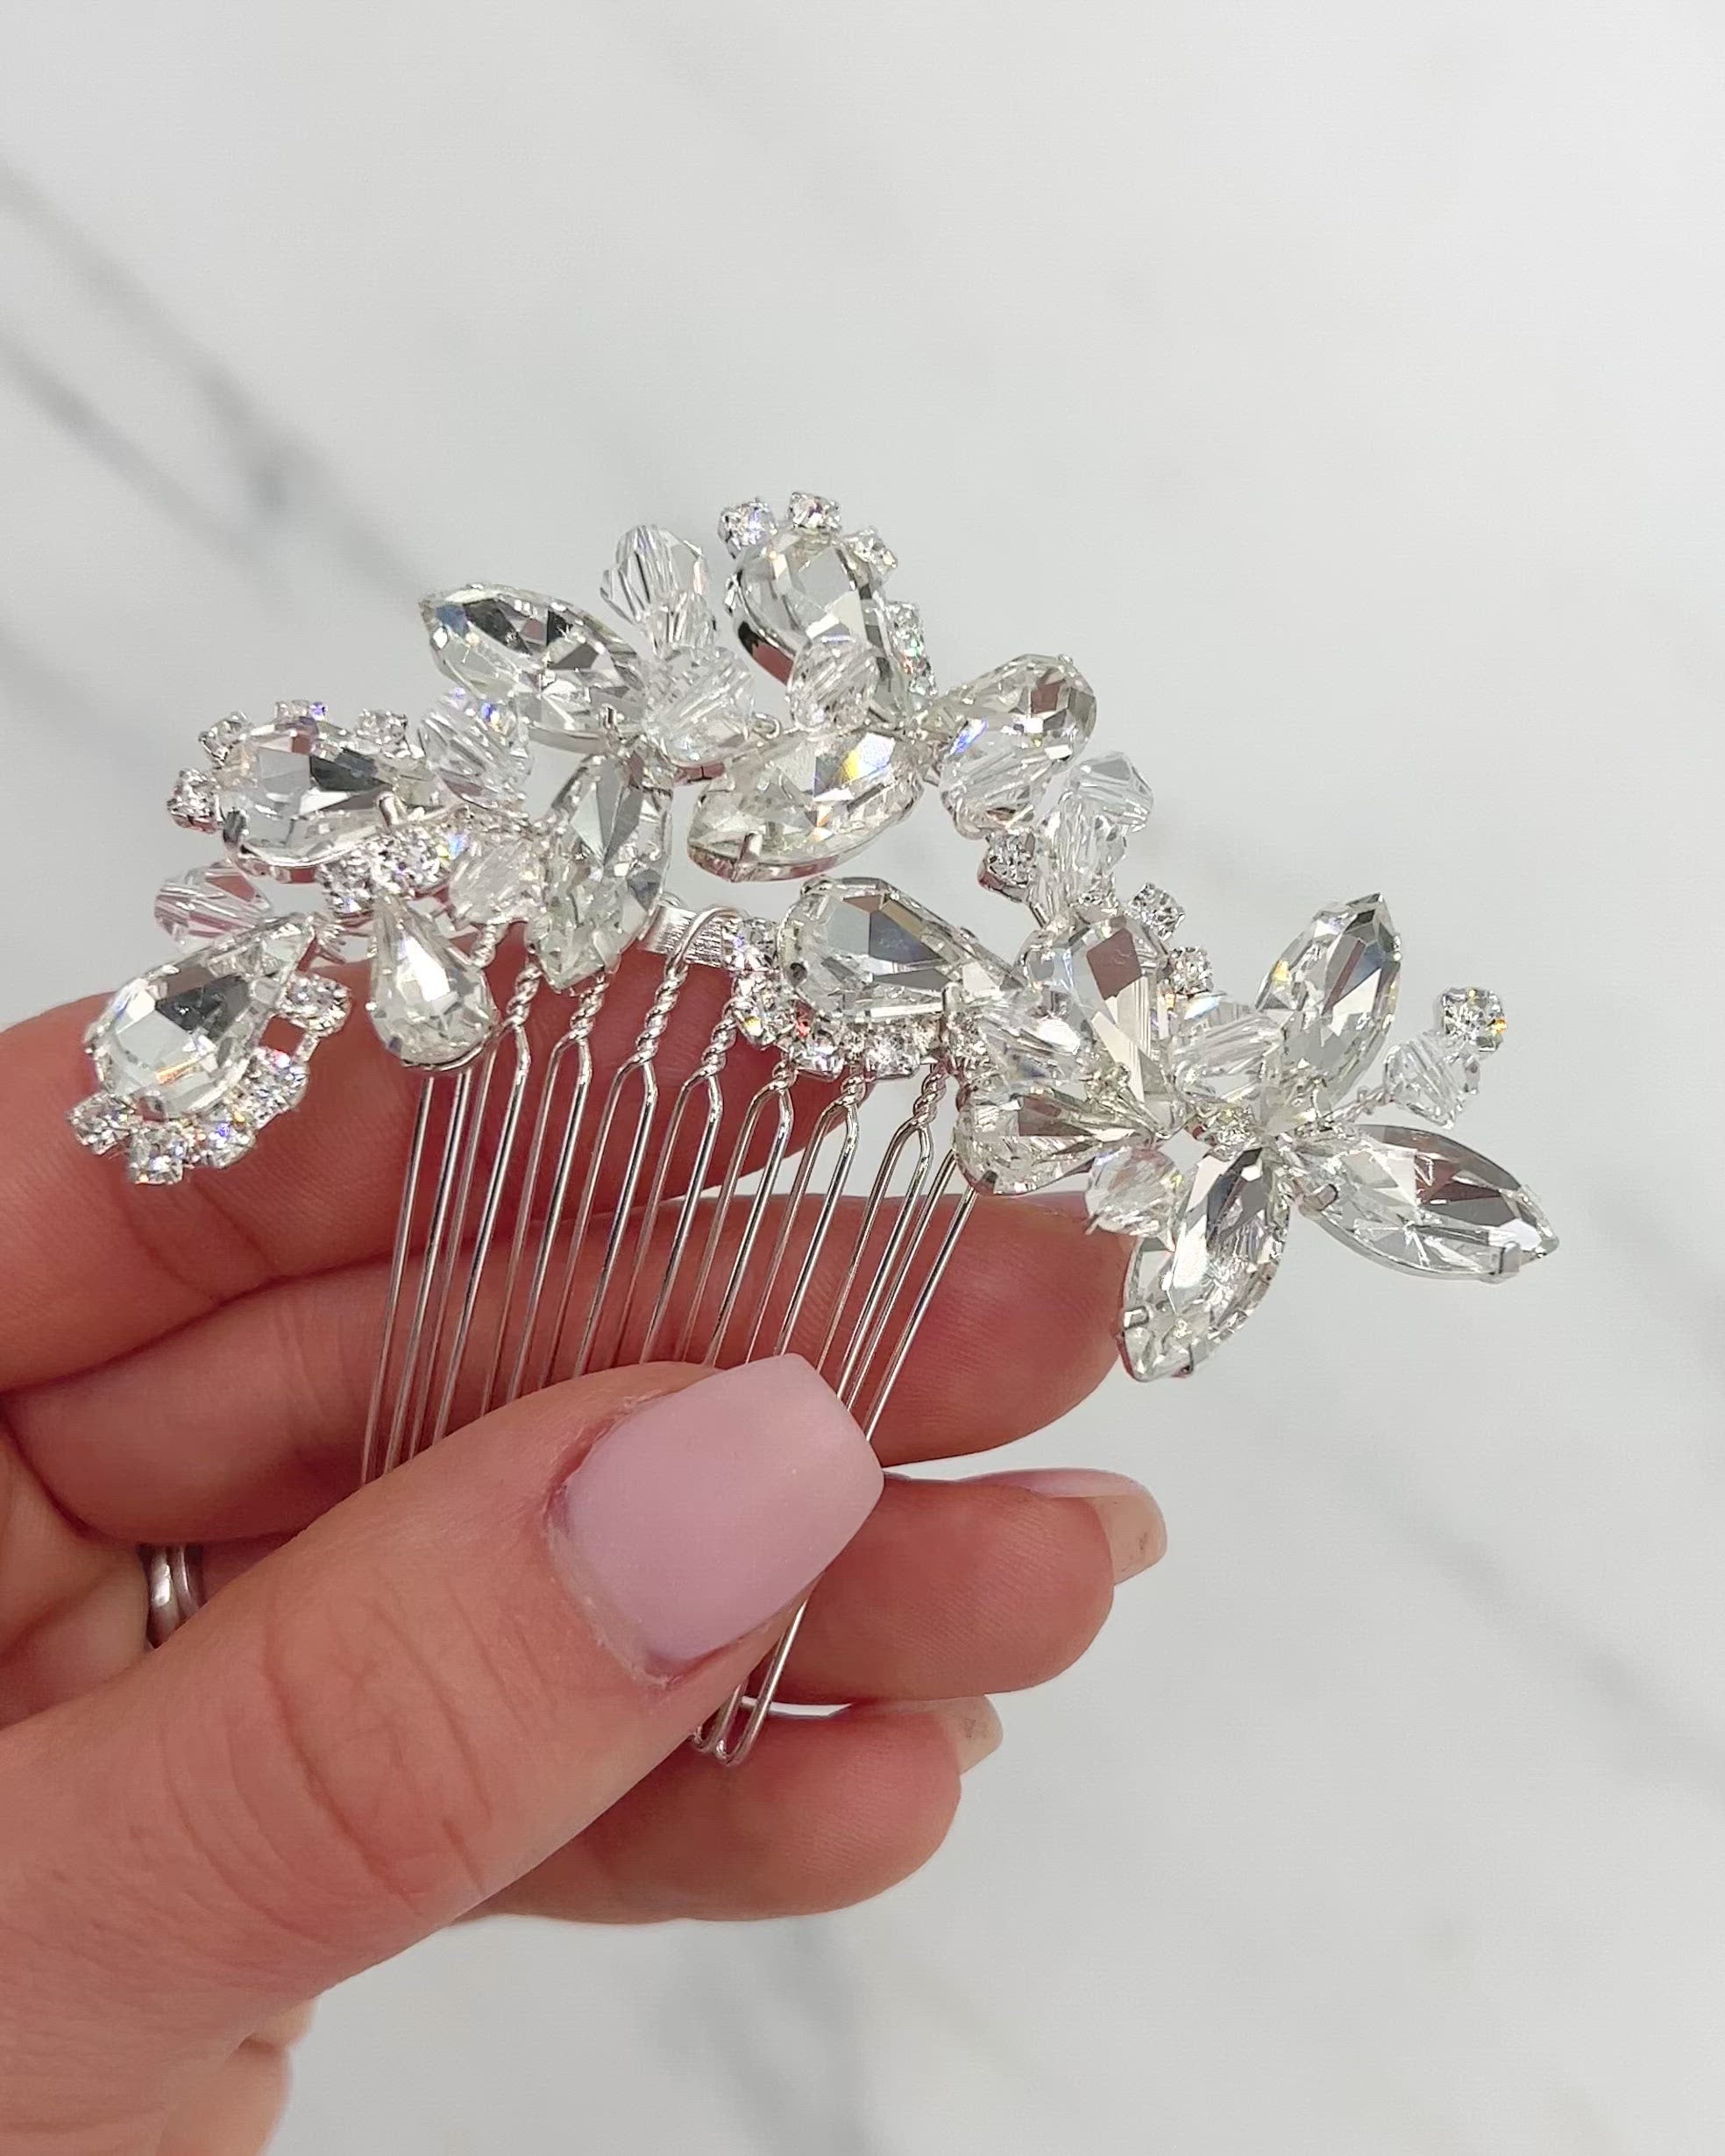 JLZXSY Freshwater Pearl Flower Leaves Design Silver Bridal Hair Comb  Crystal Slide Hair Comb Wedding Hair Jewelry Accessories